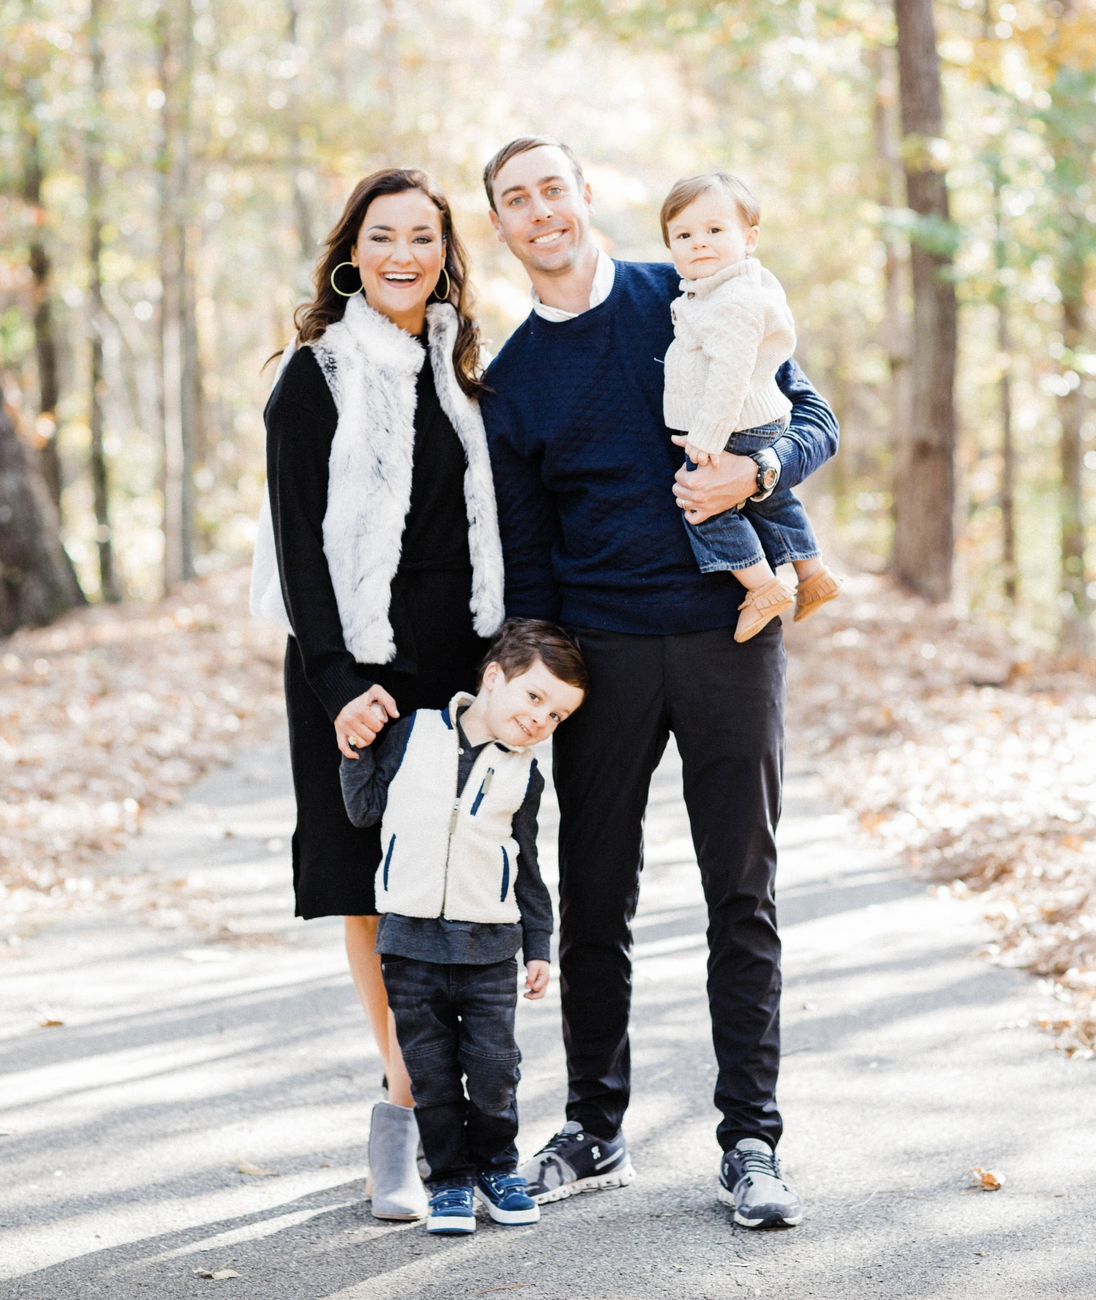 Top 10 Things to Love About Being A Boy Mom by Alabama Life + Style Blogger, Heather Brown // My Life Well Loved